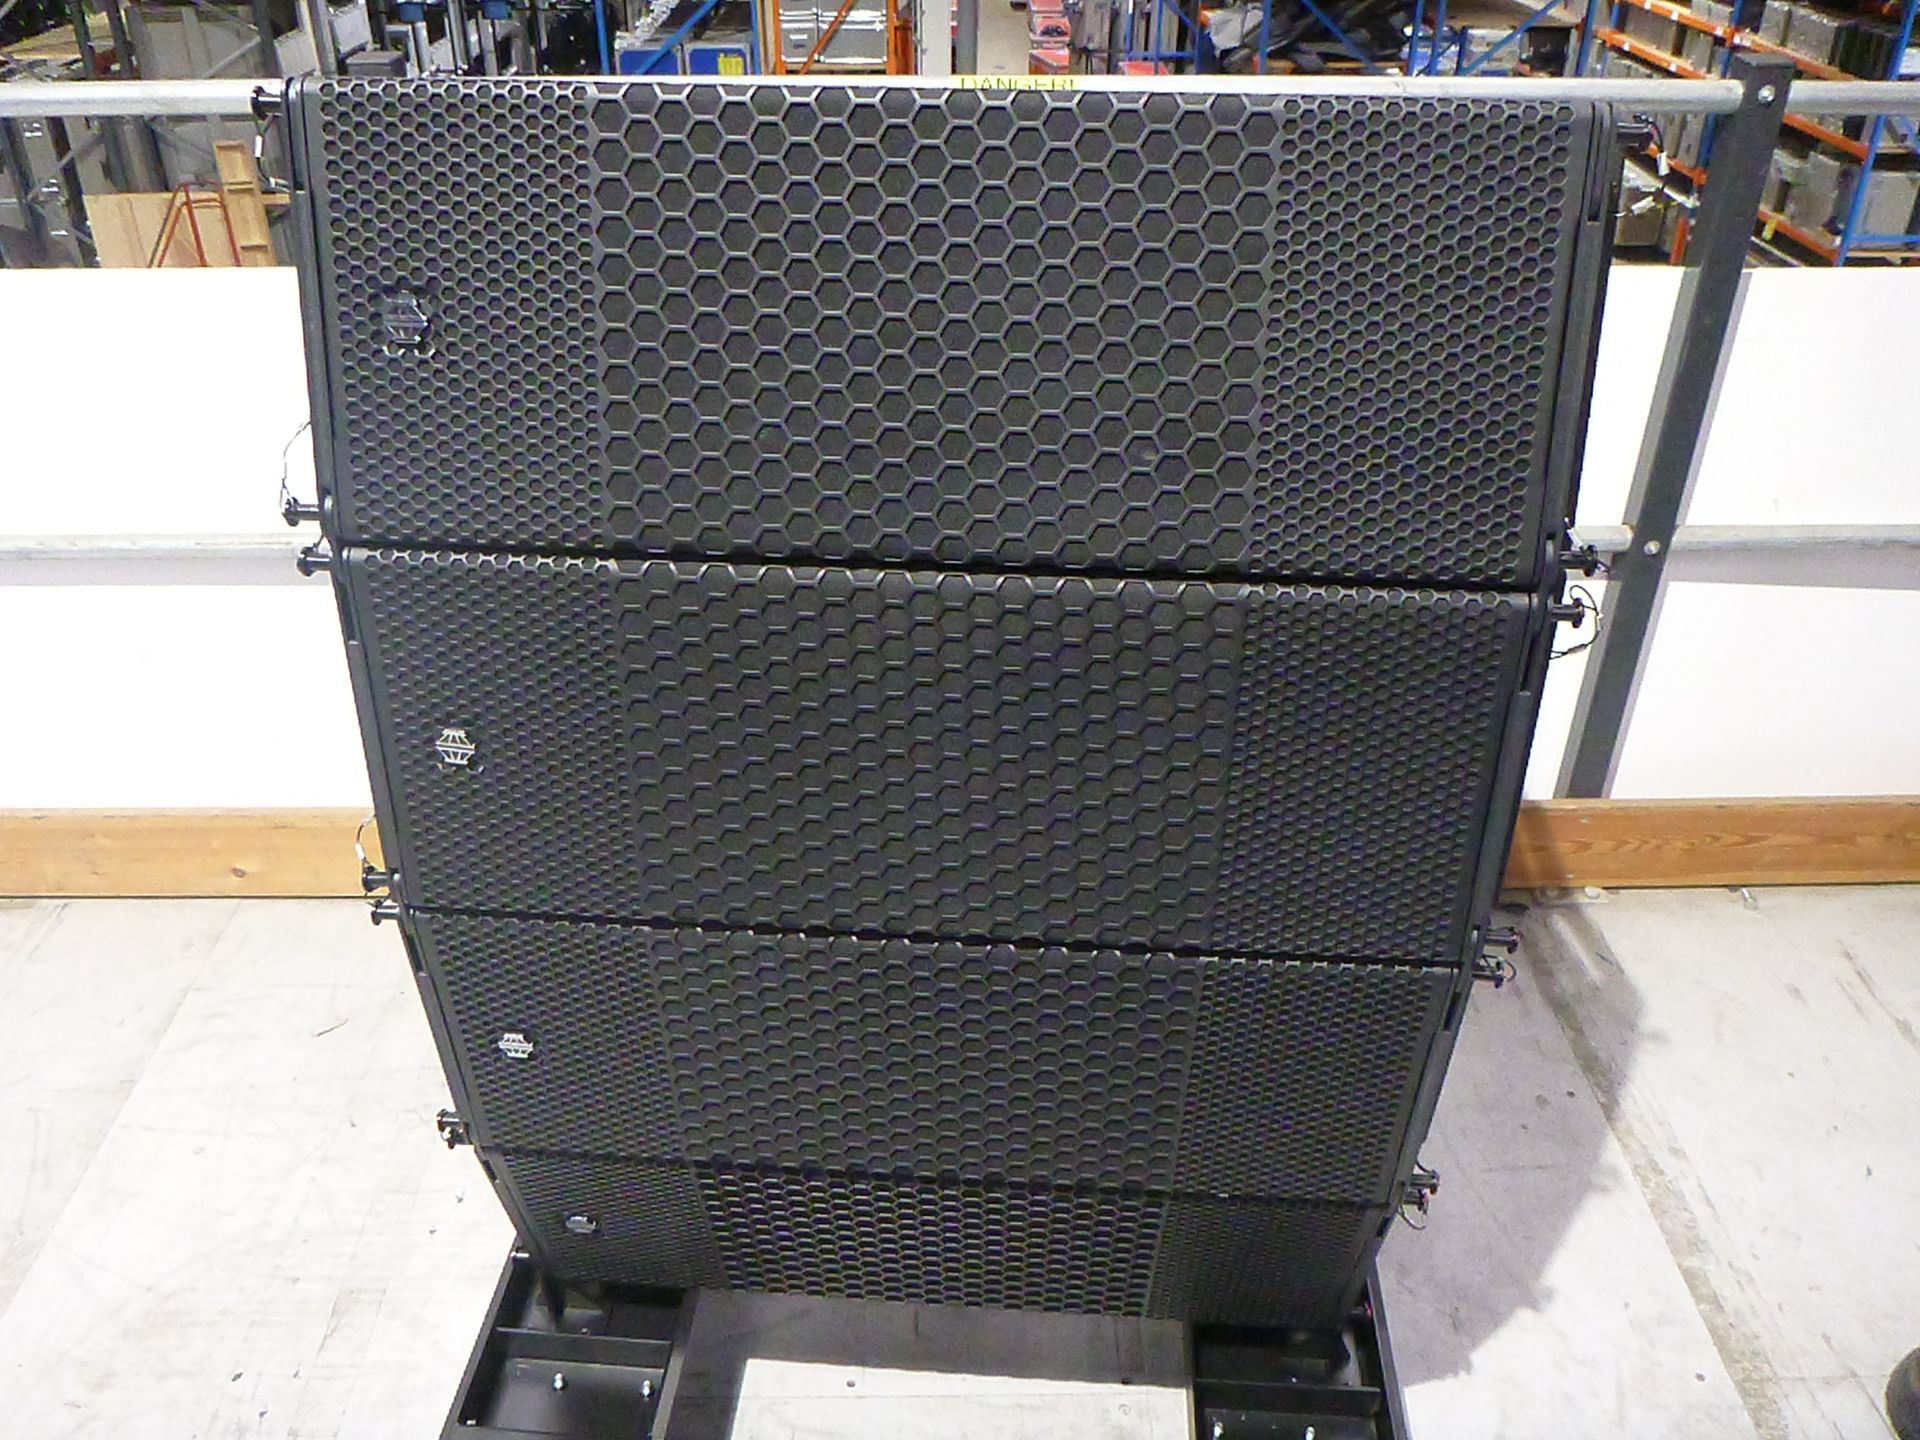 EM Acoustics Halo B Line Array Loudspeakers, Qty 4 (1 x 4) Mounted on mobile frame with padded - Image 2 of 8